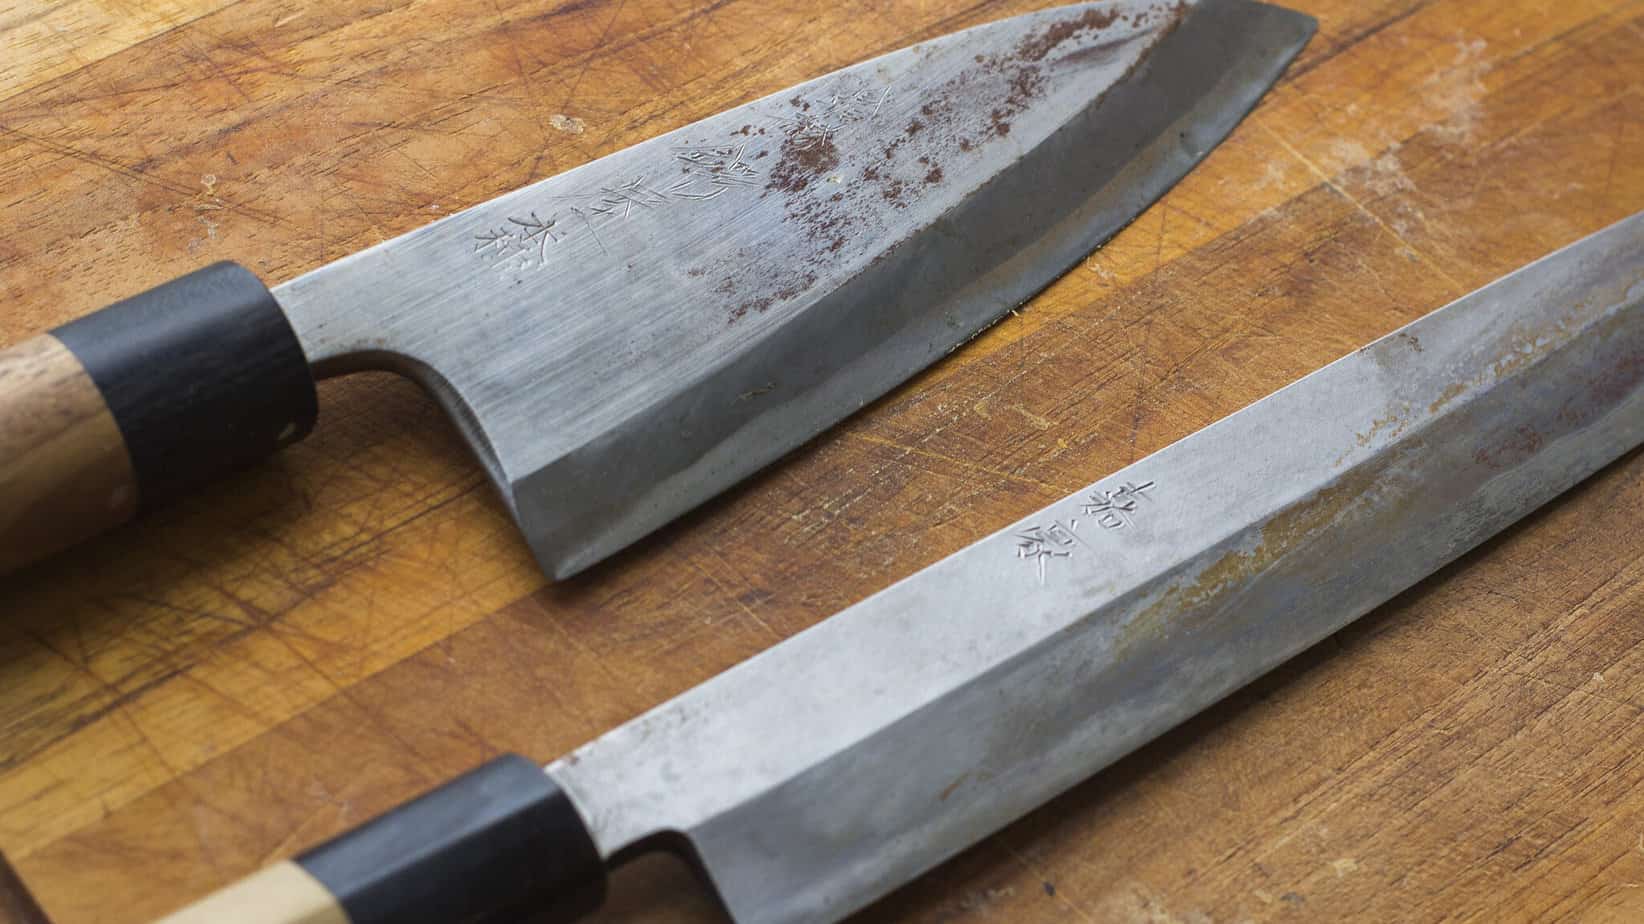 remove rust from rusty kitchen knives